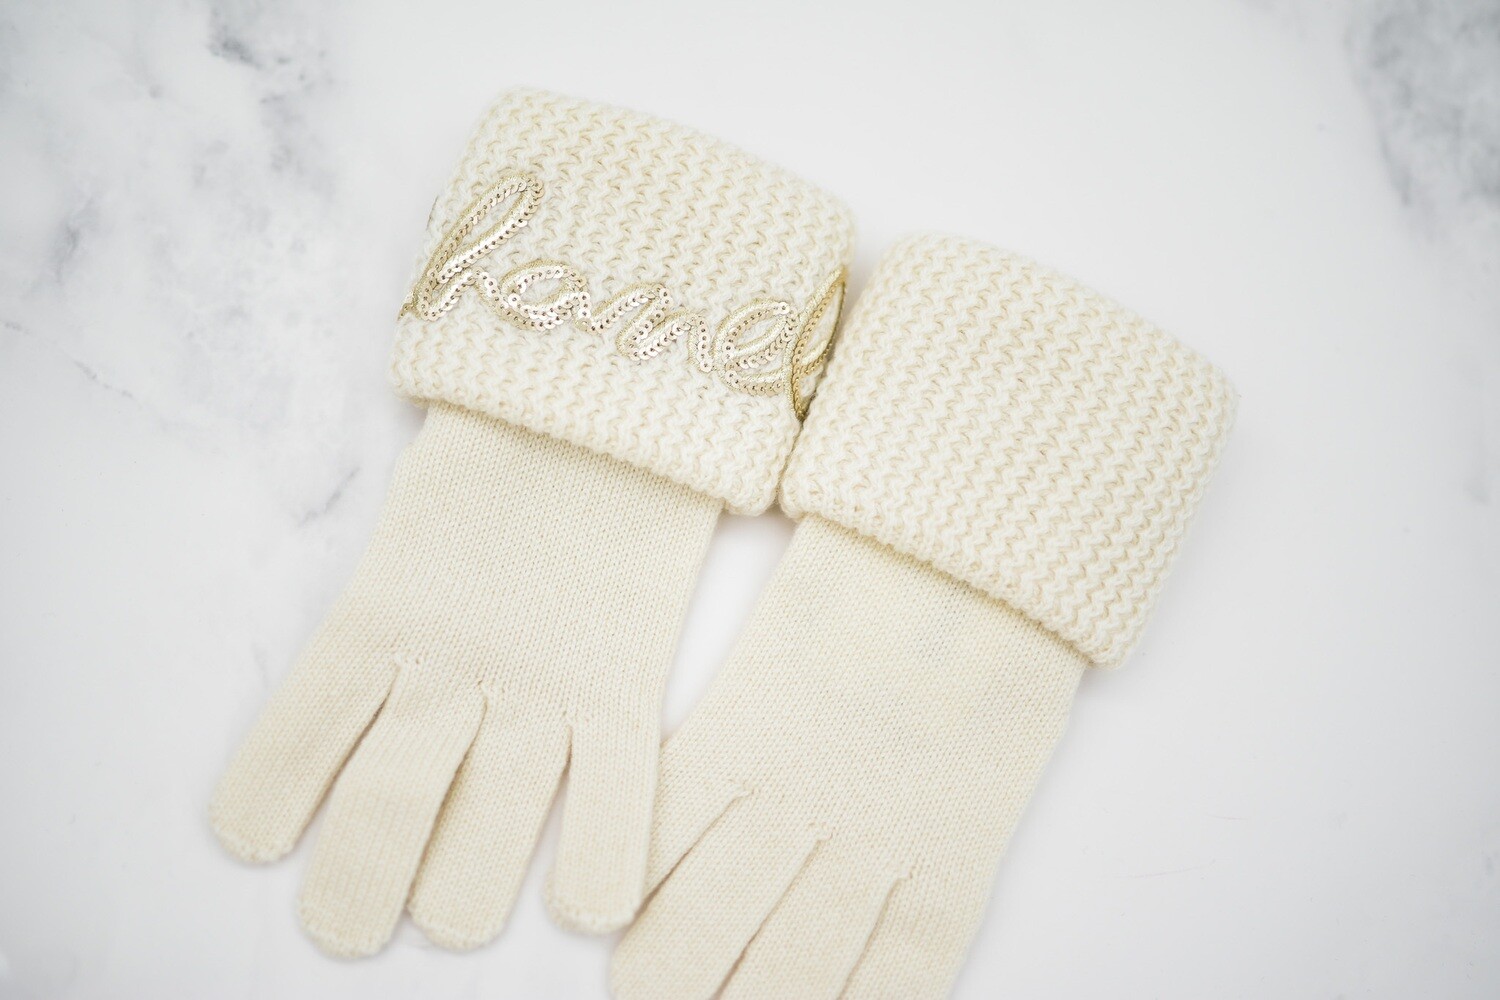 Chanel Gloves, Ivory Cashmere Knit with White Sequin Script, New No Box  GA001